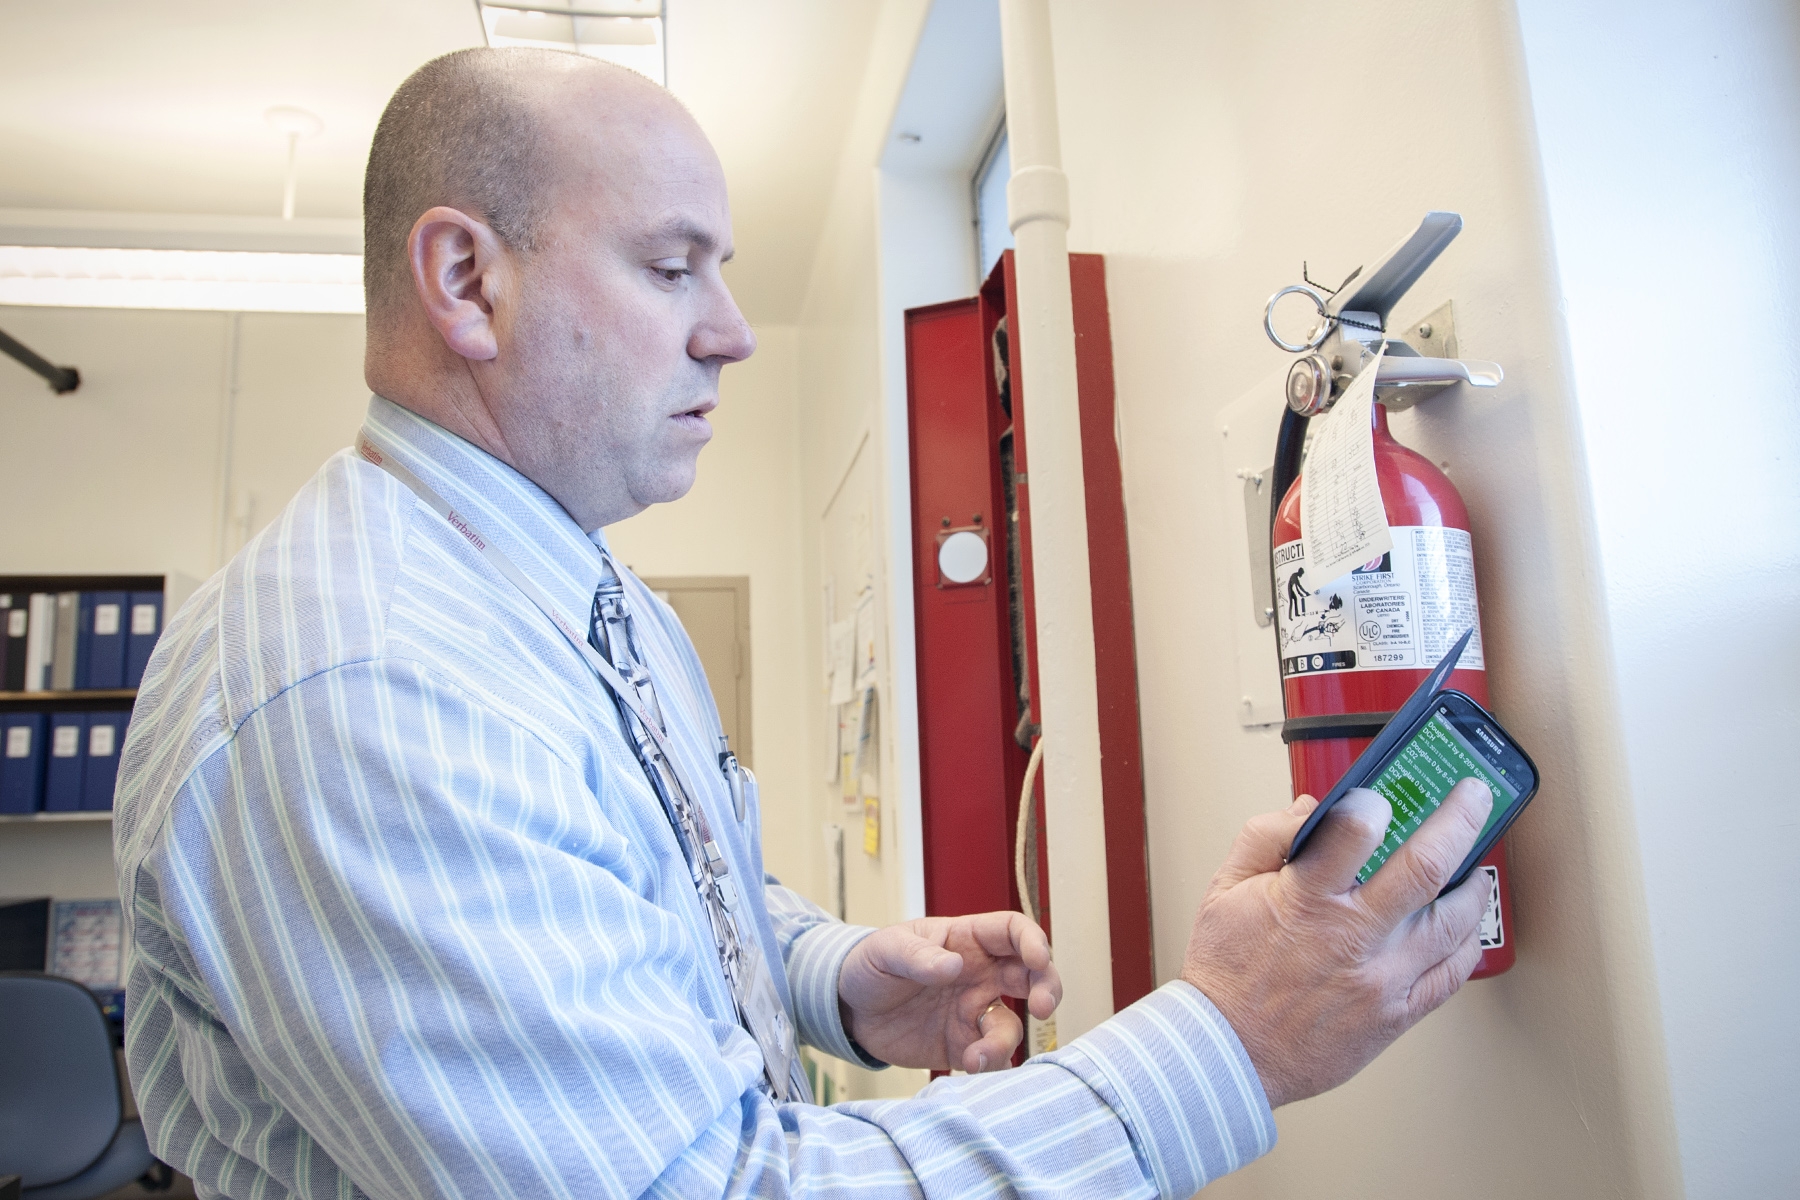 New wireless technology improving safety at KGH